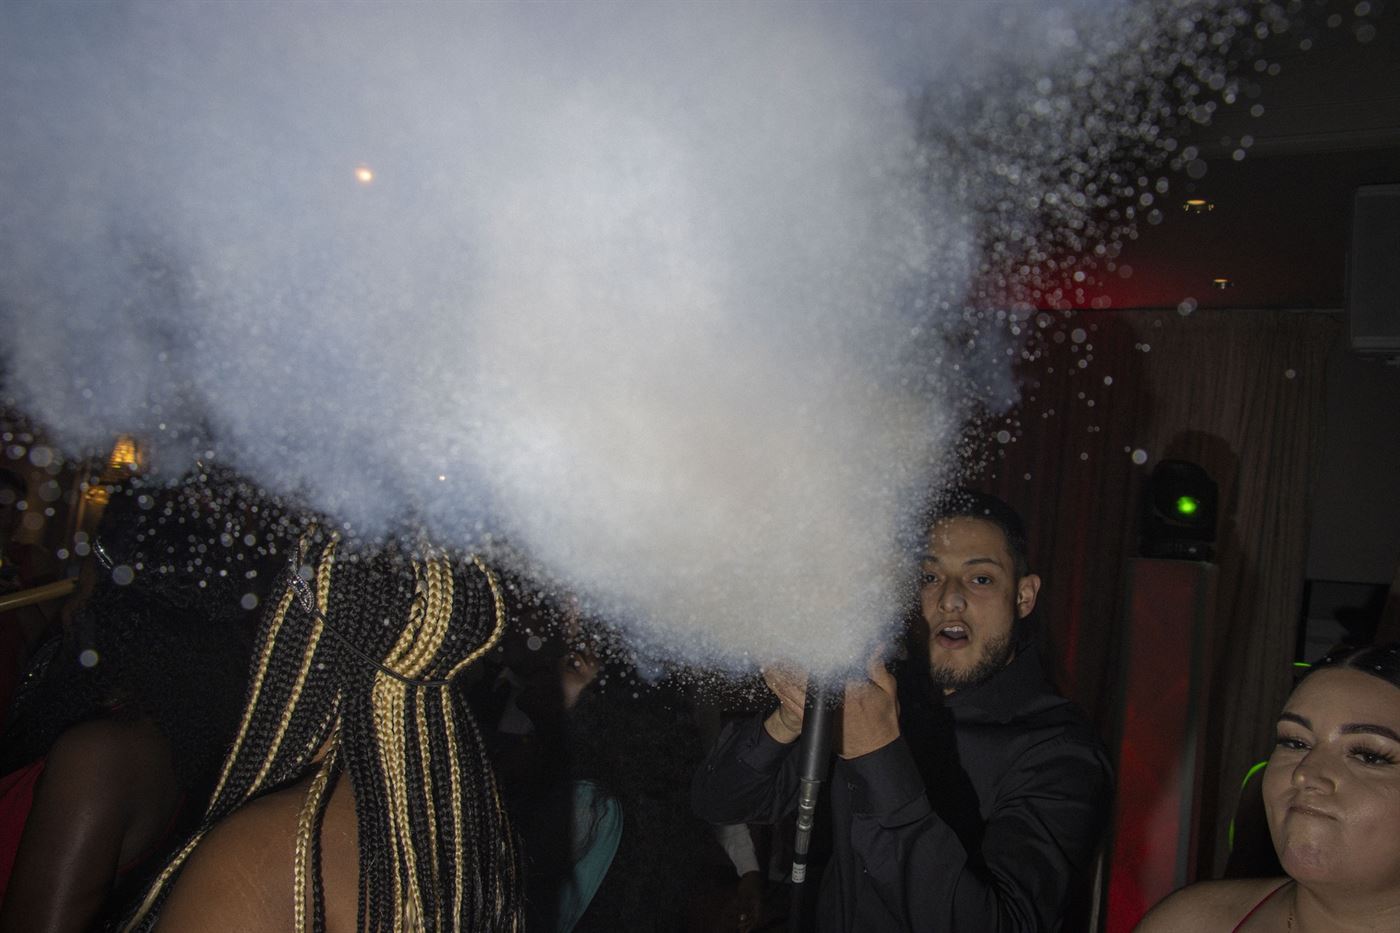 At the night's climax, the DJ came from behind his table and blasted the crowd with a CO2 canon while balloons were handed out as well. Julian Rigg | The Montclarion